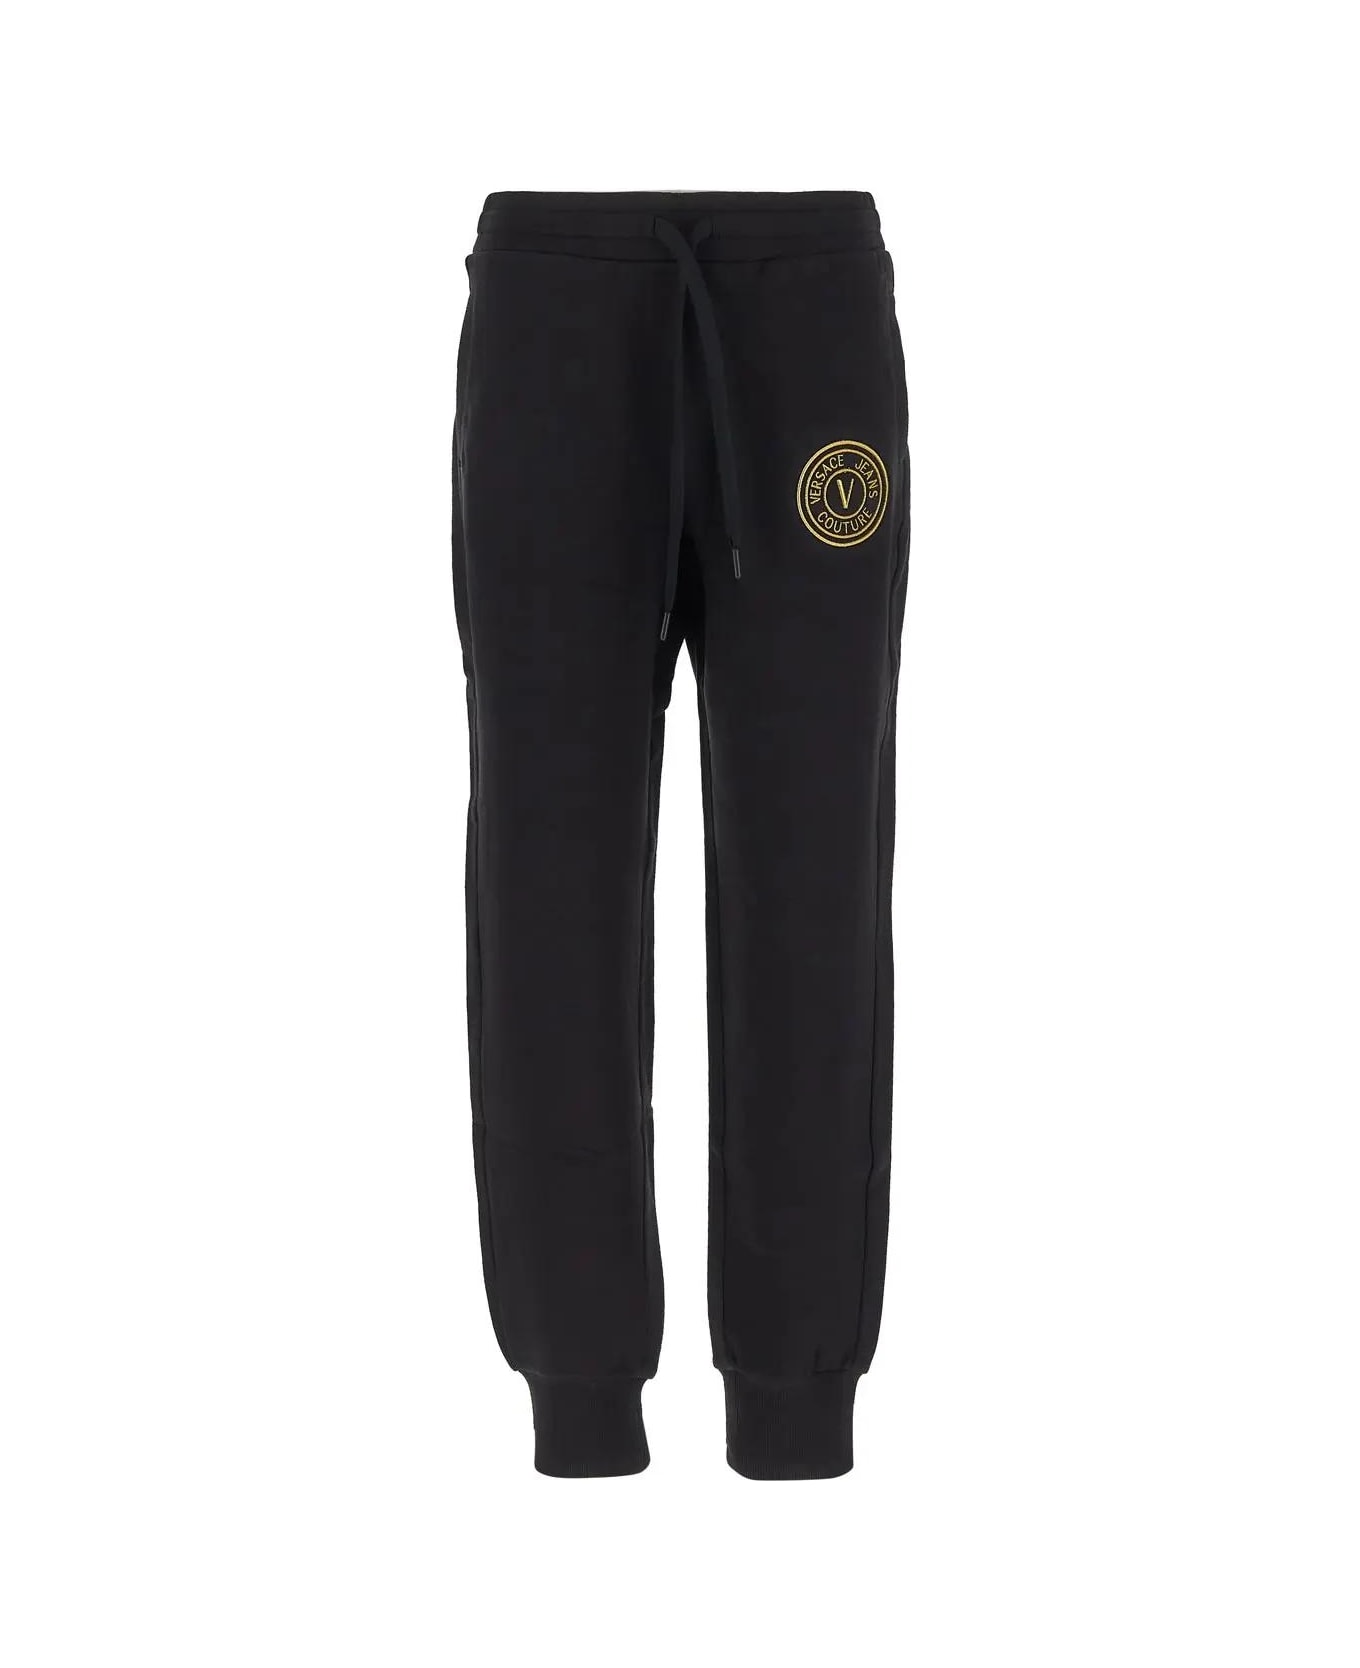 Versace Jeans Couture Logo Trouser - Black/gold